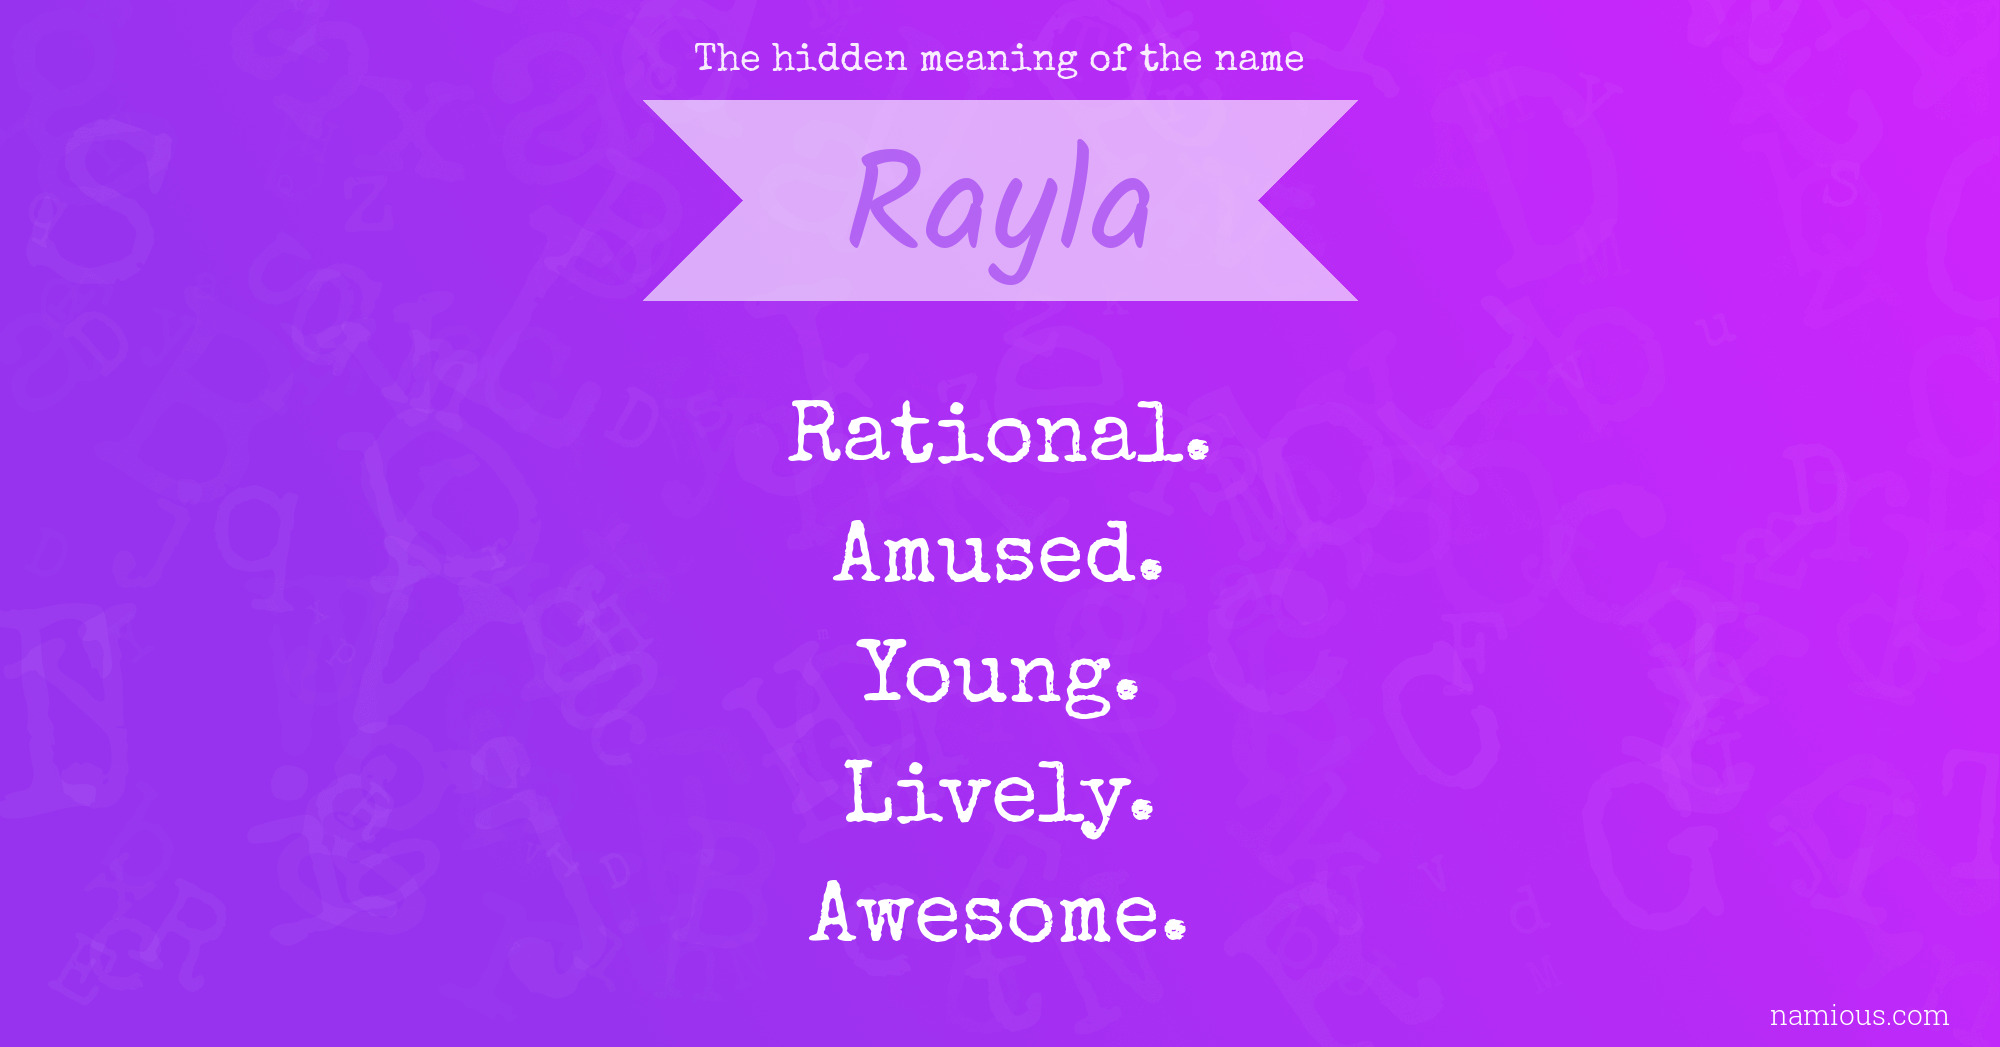 The hidden meaning of the name Rayla